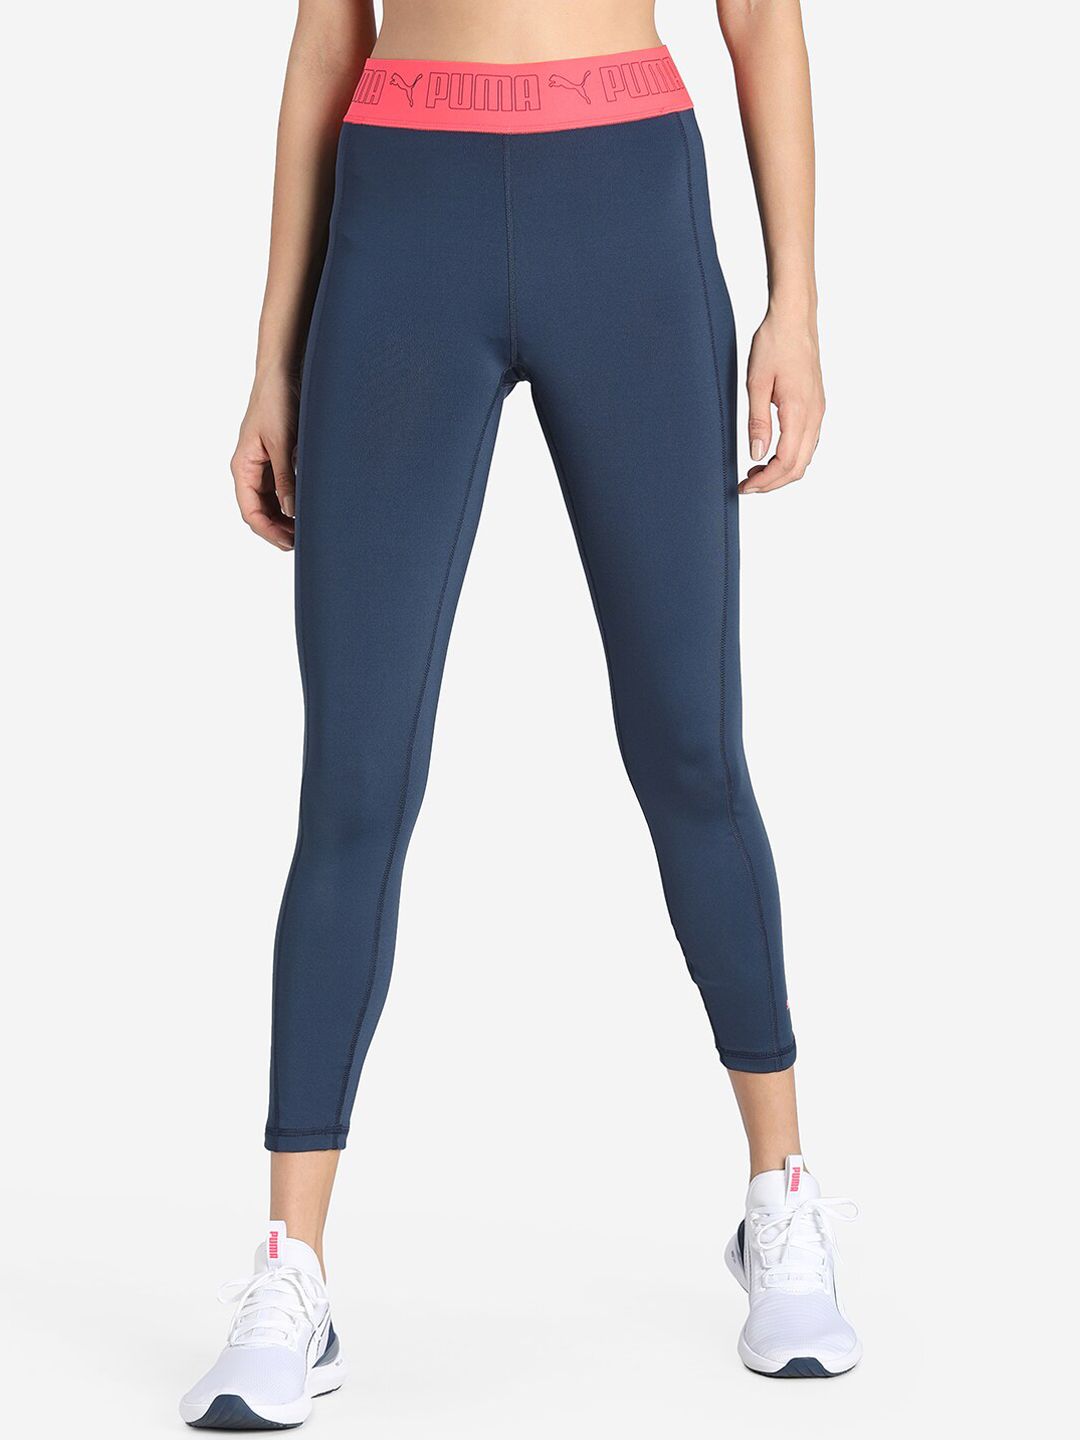 Puma Women Blue Solid Tights Price in India